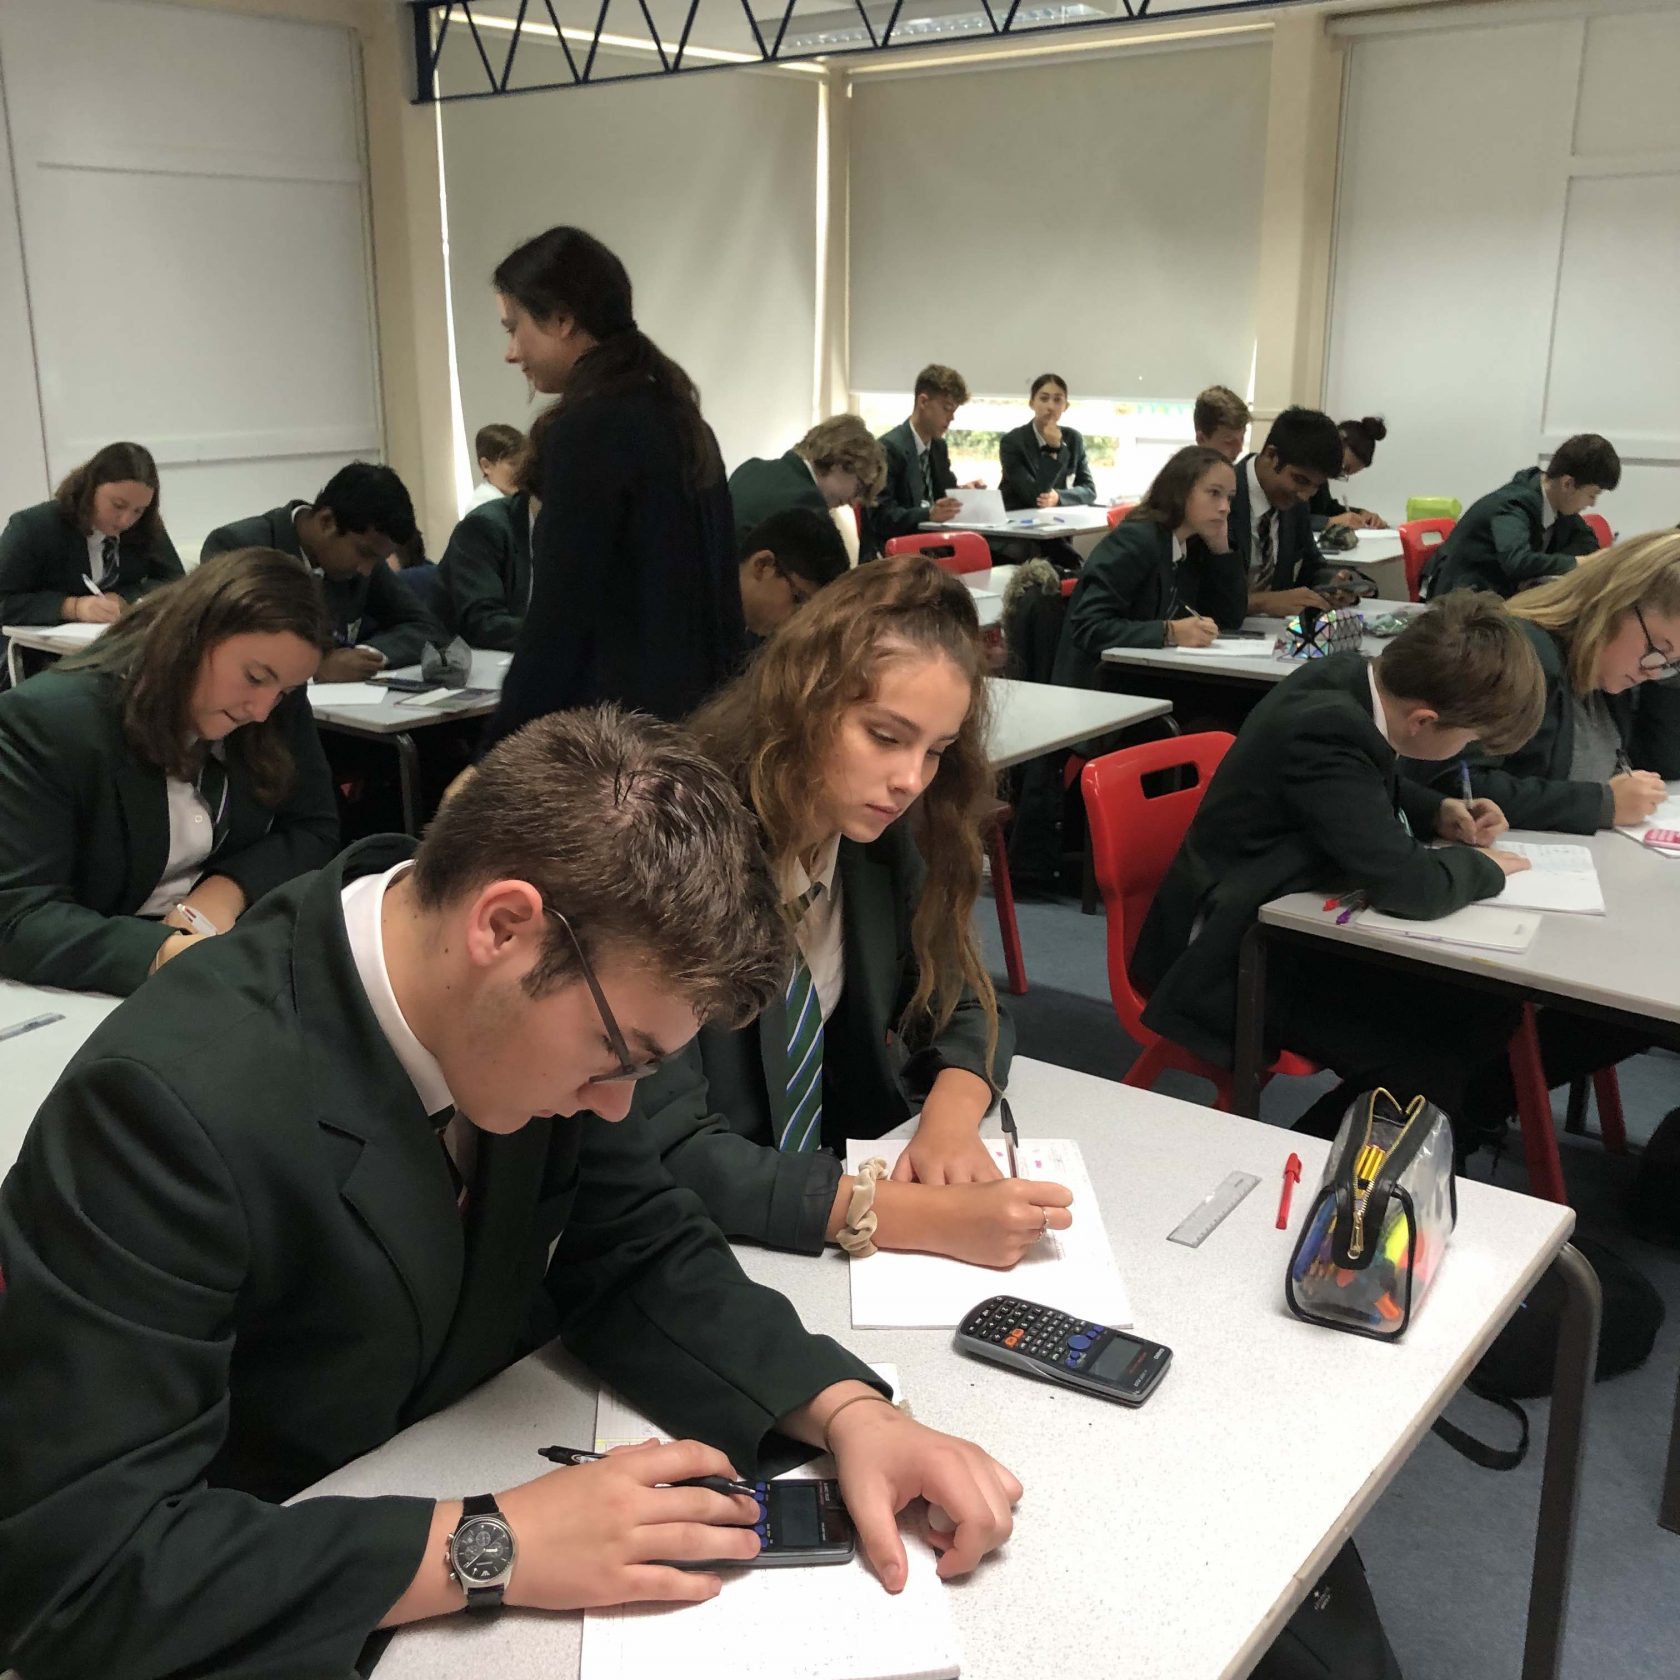 Fantastic learning atmosphere in maths